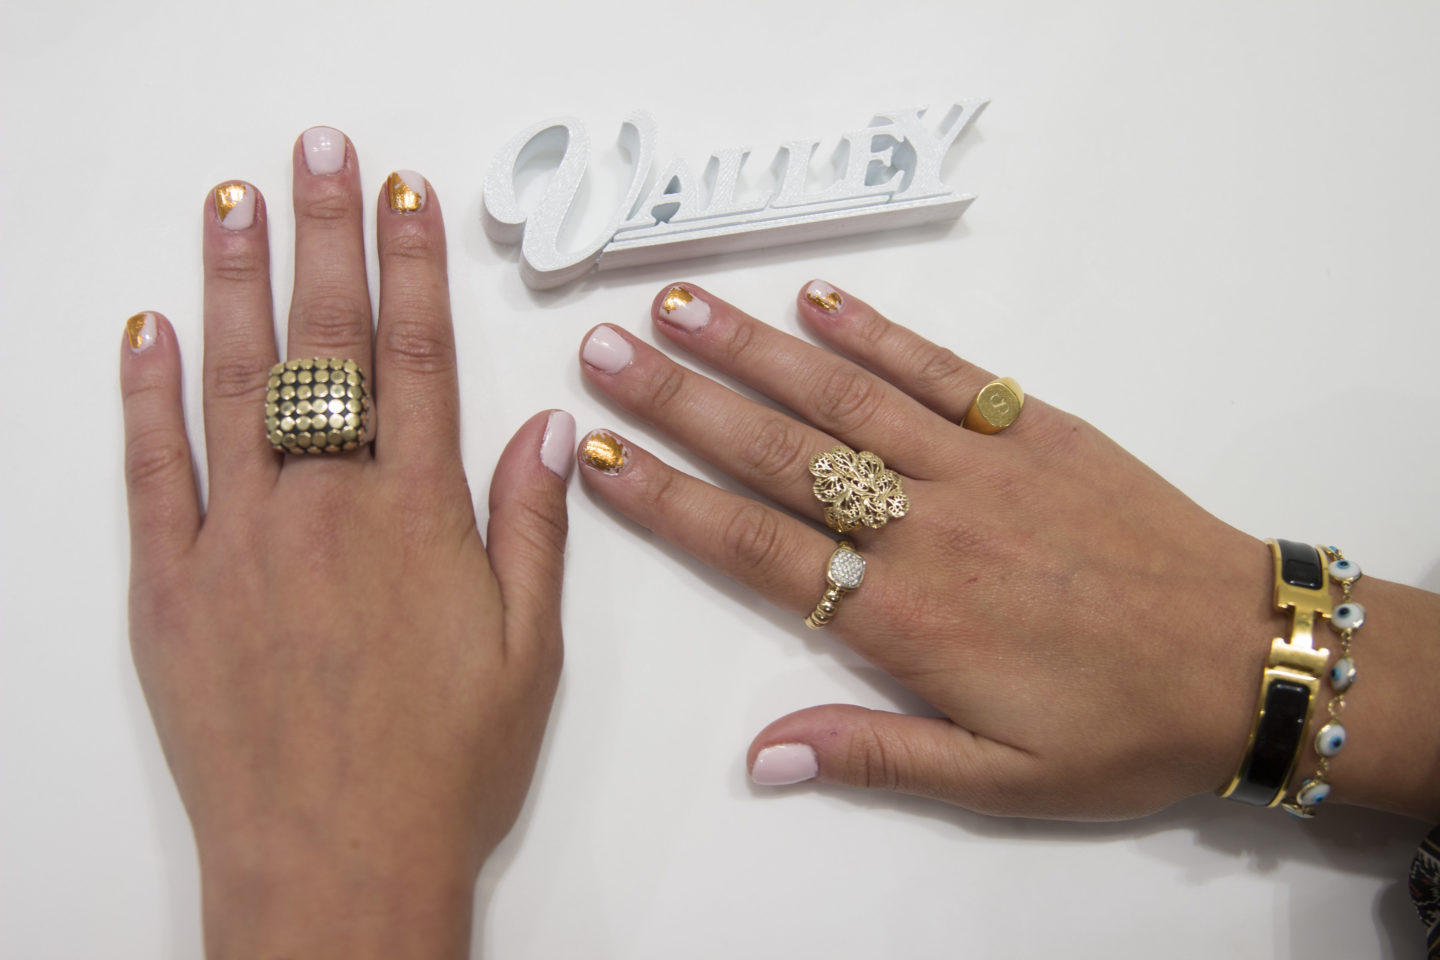 blvd scarsdale-valley nails-blogger